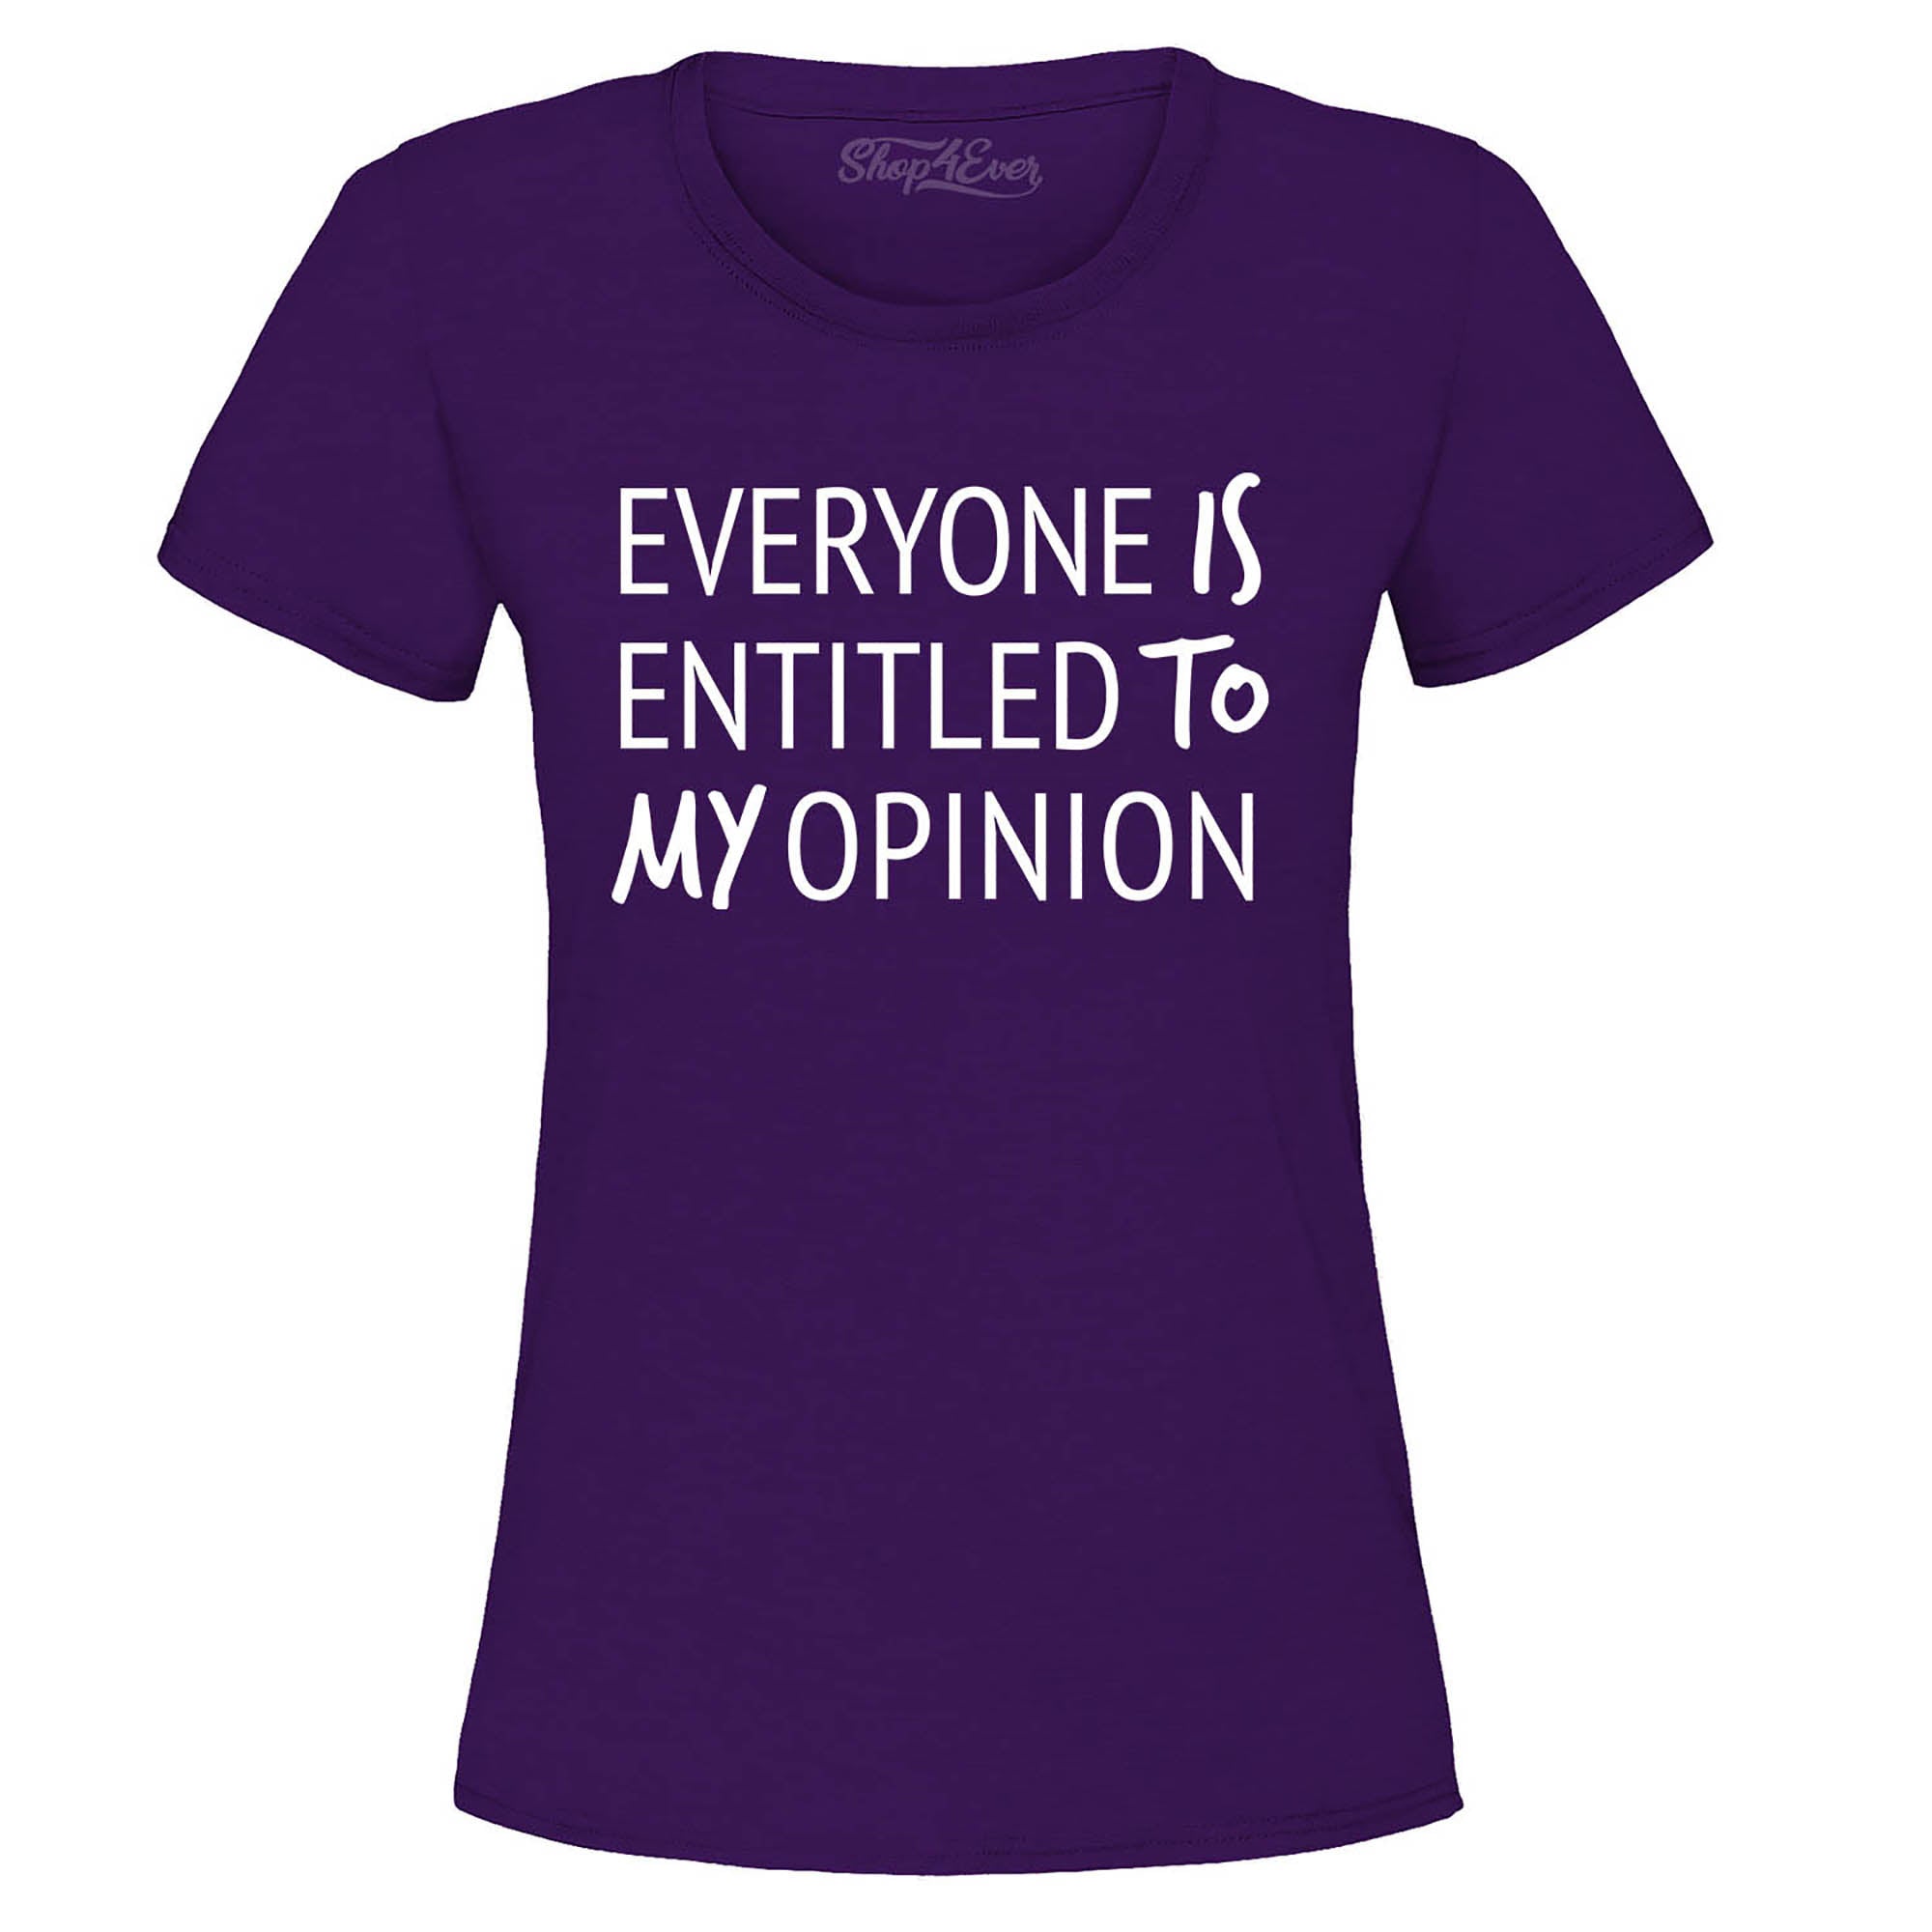 Everyone is Entitled to My Opinion Funny Sarcastic Women's T-Shirt